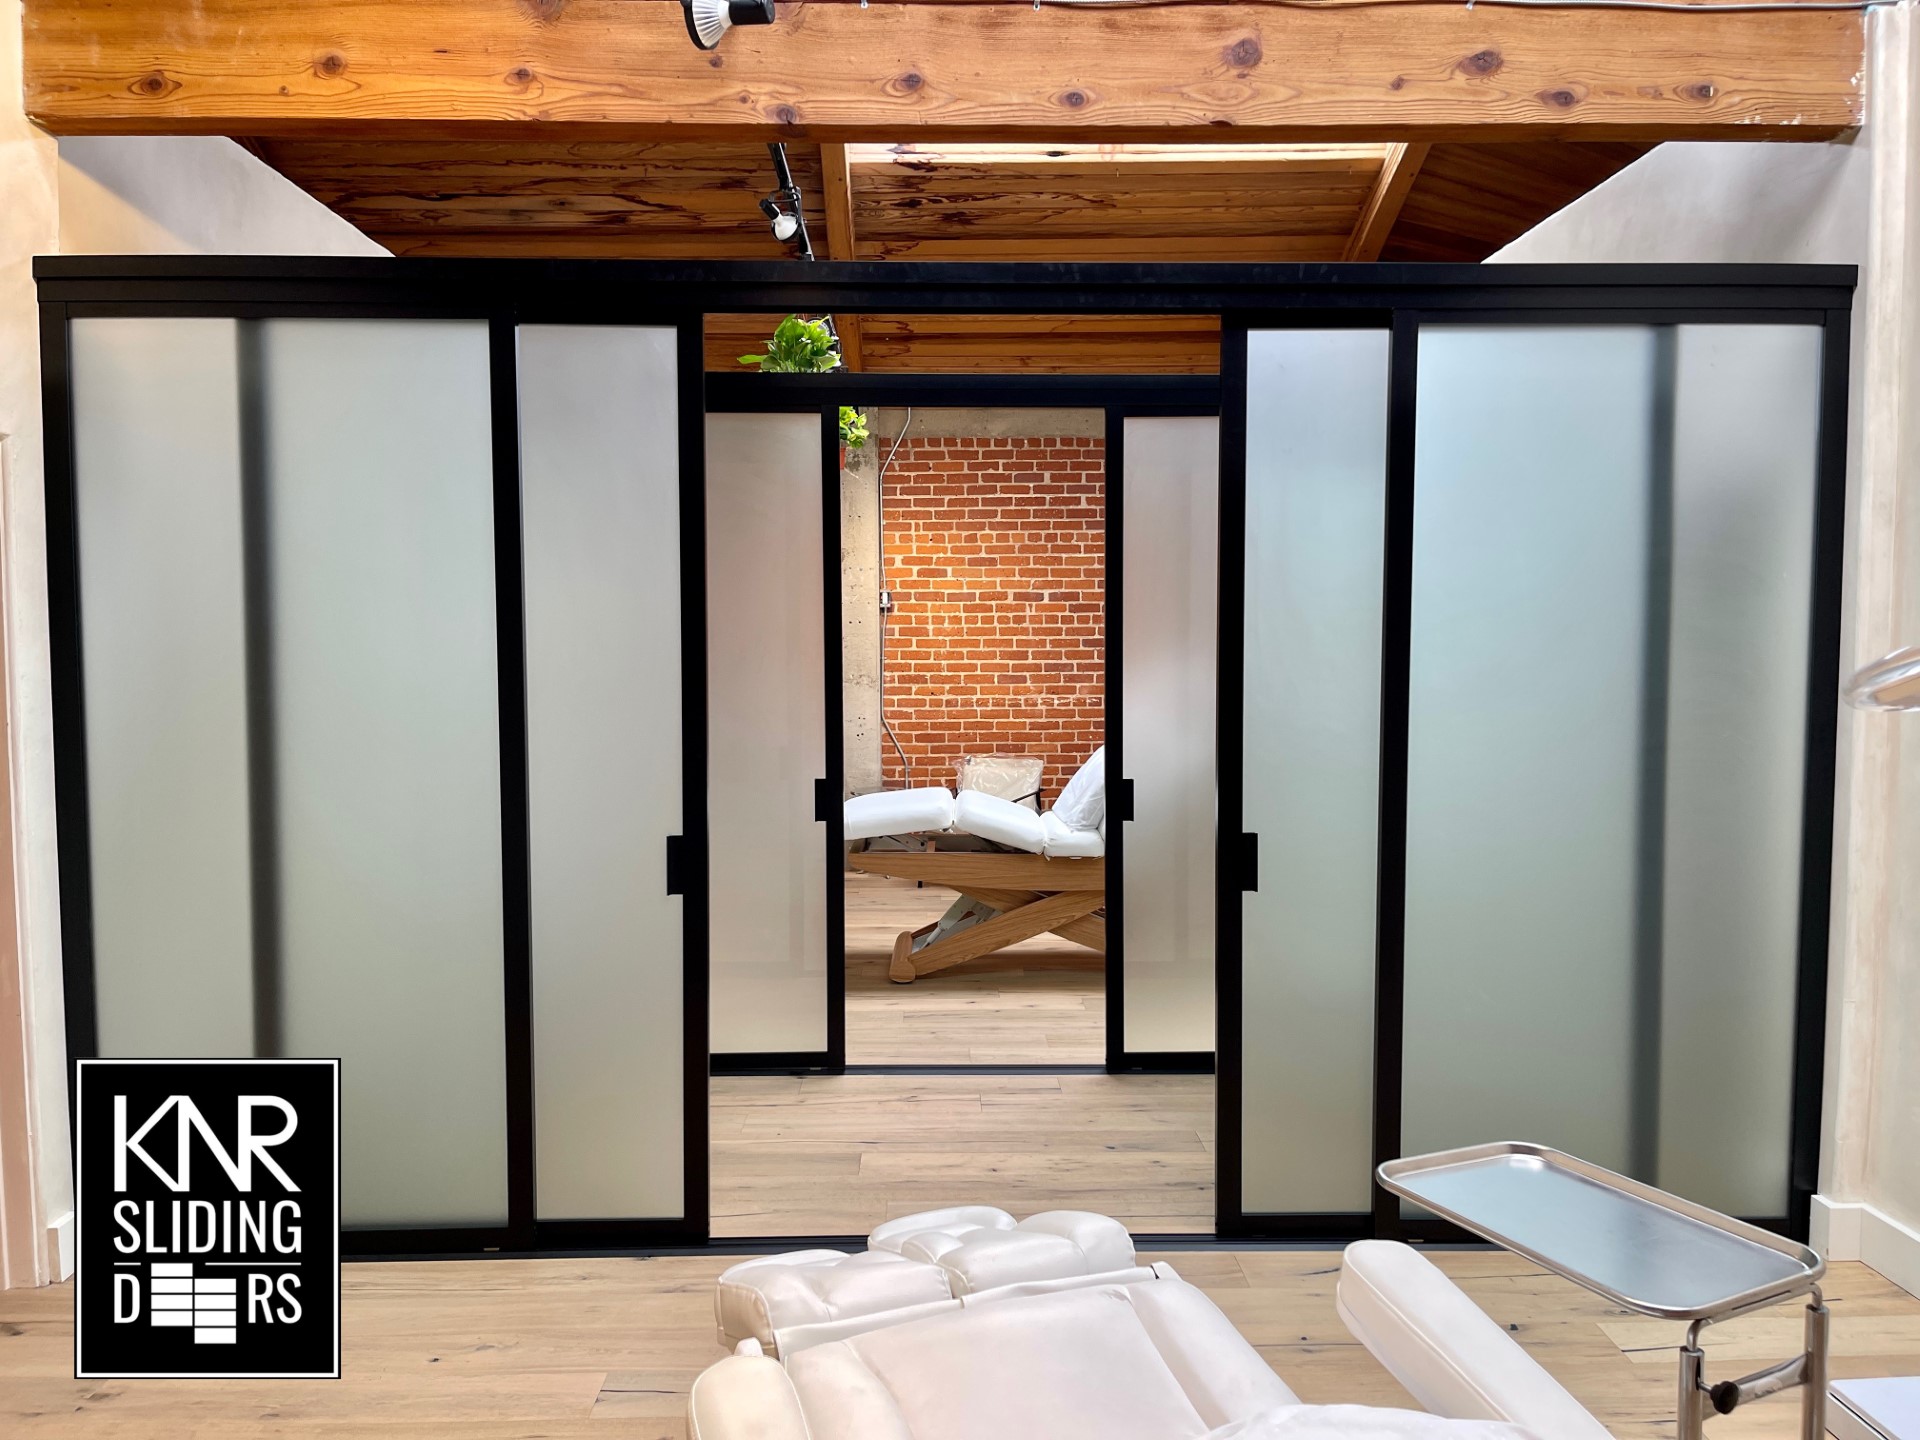 A modern room with a frosted glass sliding room divider leading to a bedroom with exposed brick walls.